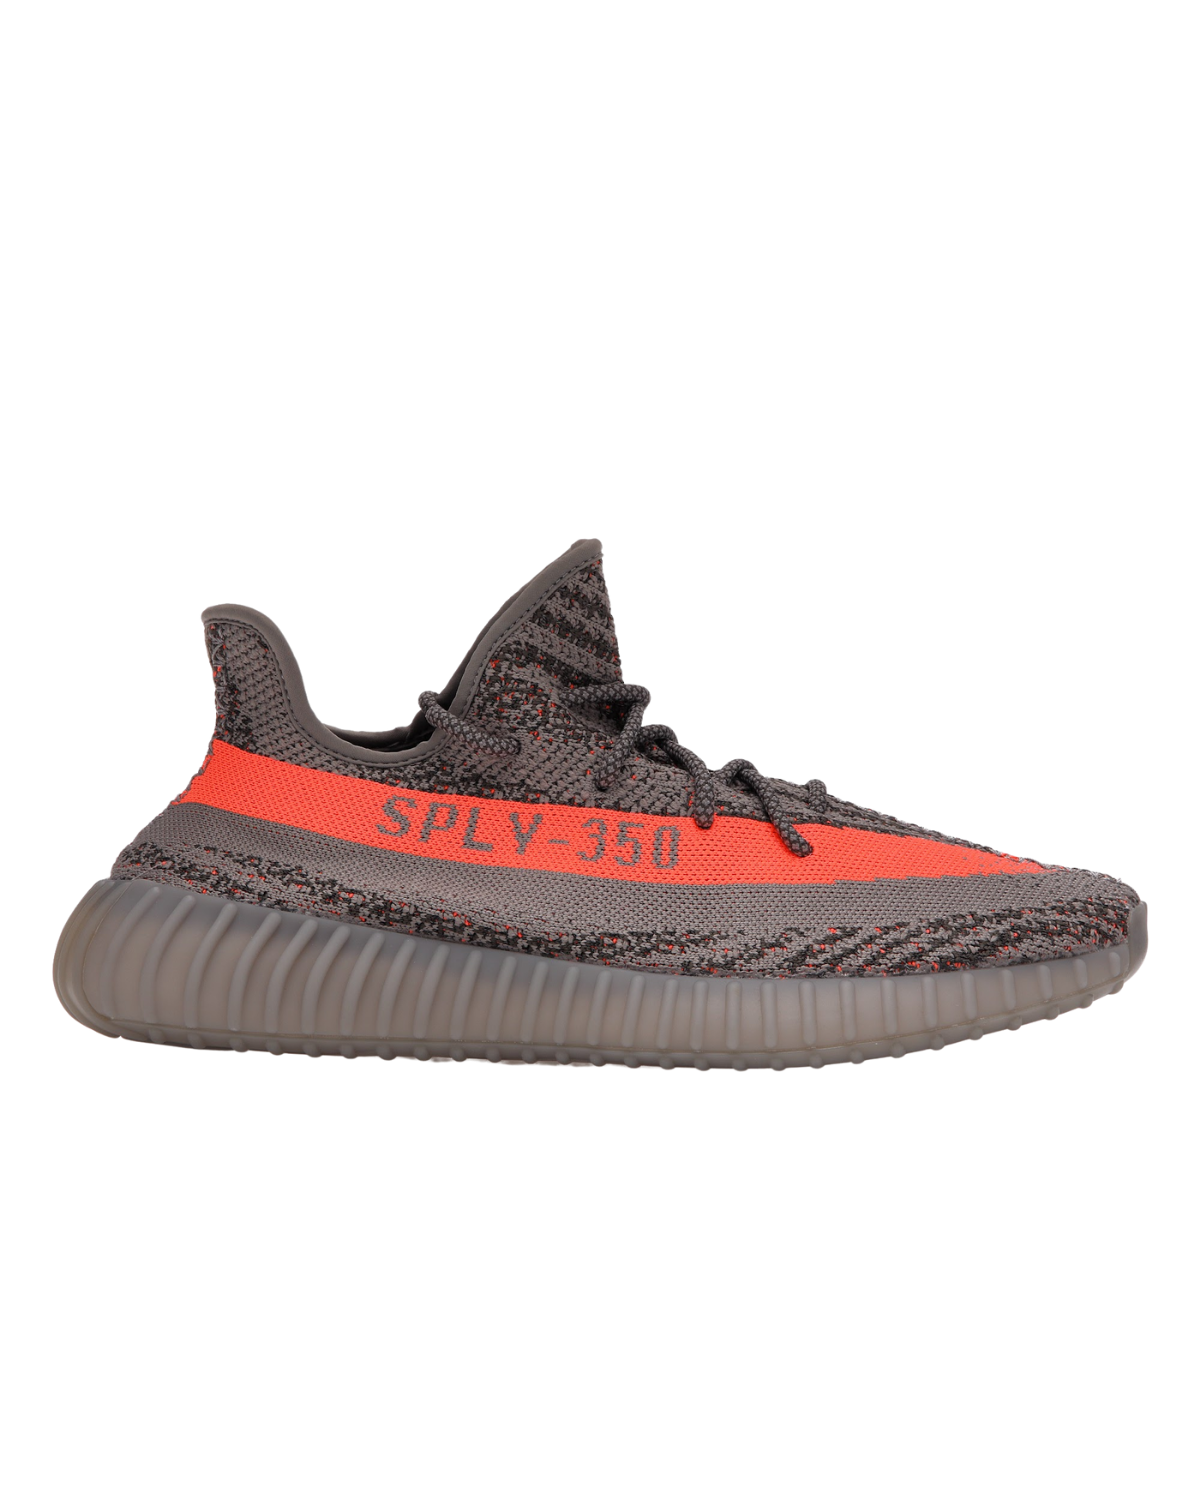 adidas Yeezy Boost 350 V2 Core Black Red - Dropsy.Store